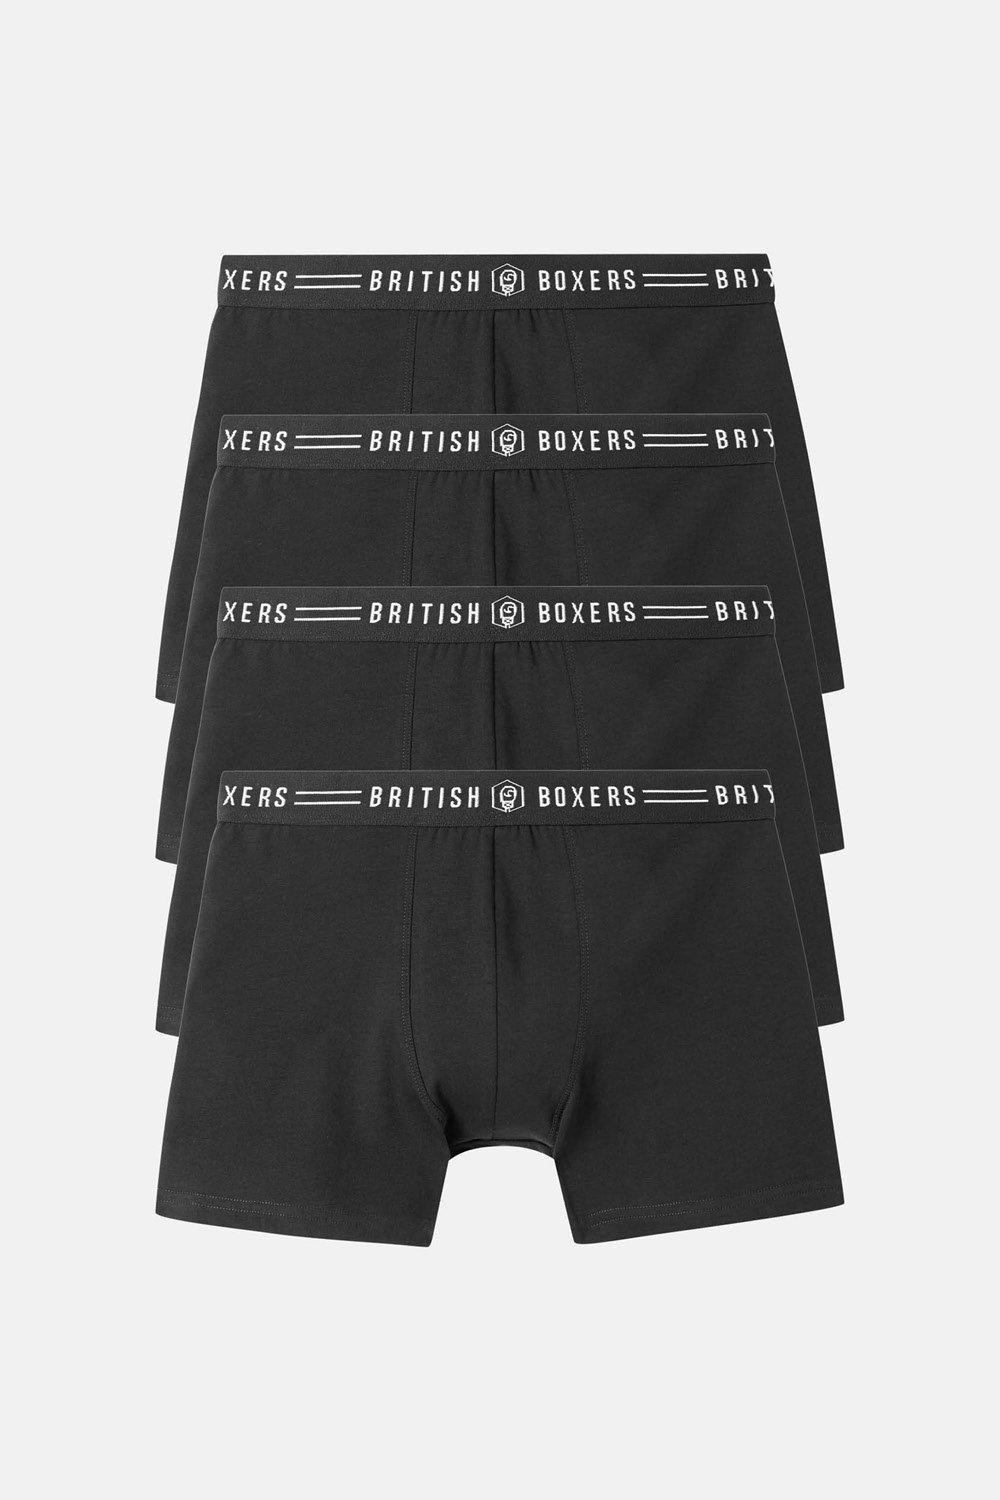 Four Pack of Black Stretch Trunks